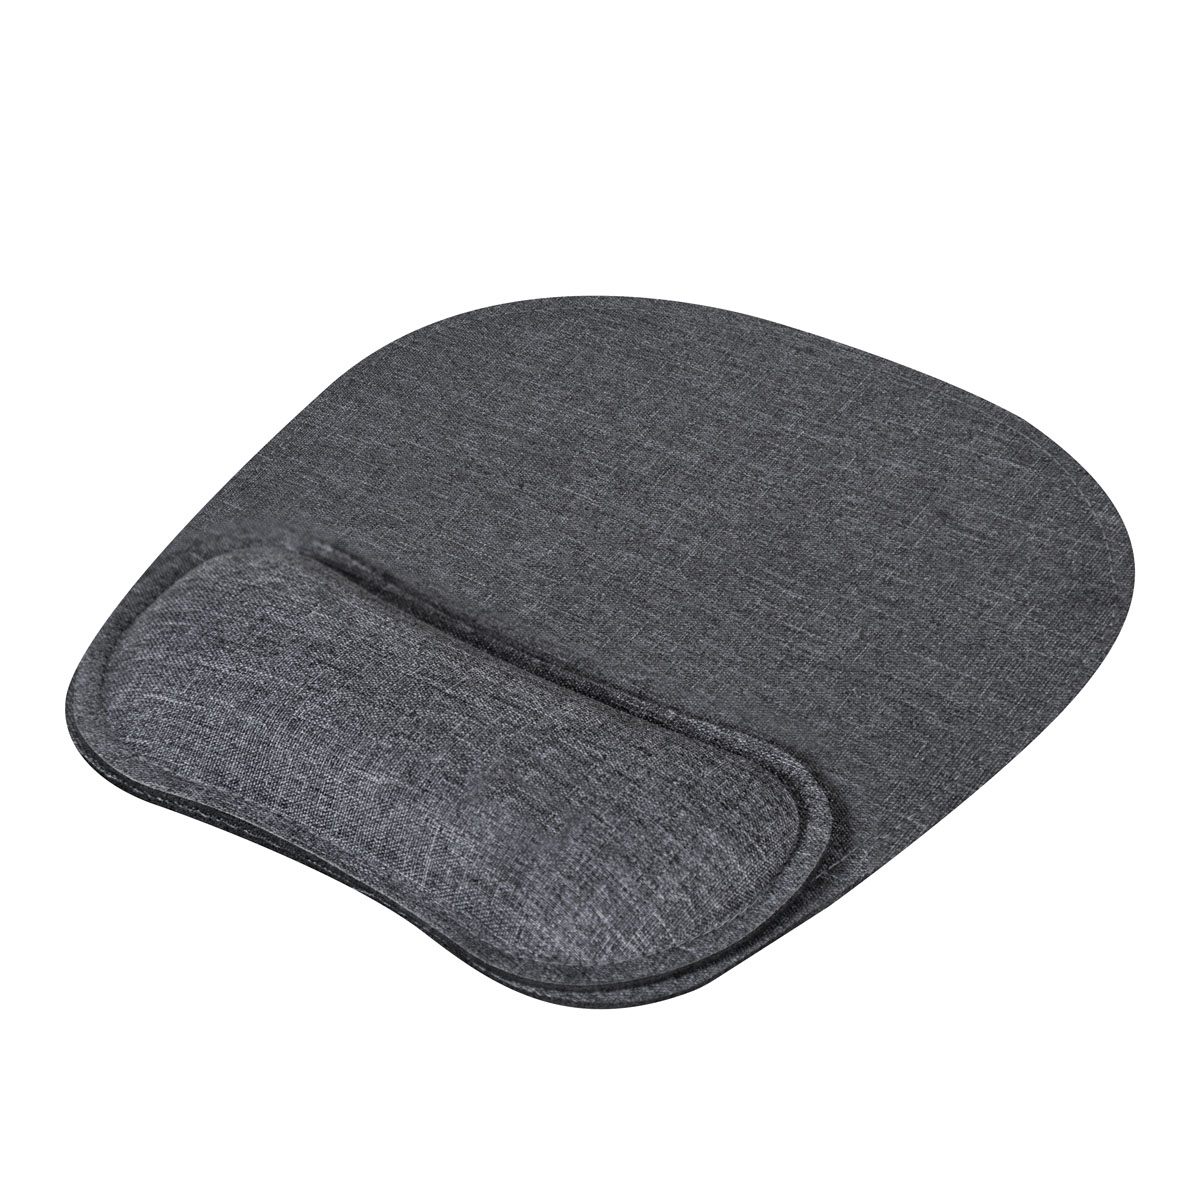 MOUSE PAD HOOVER